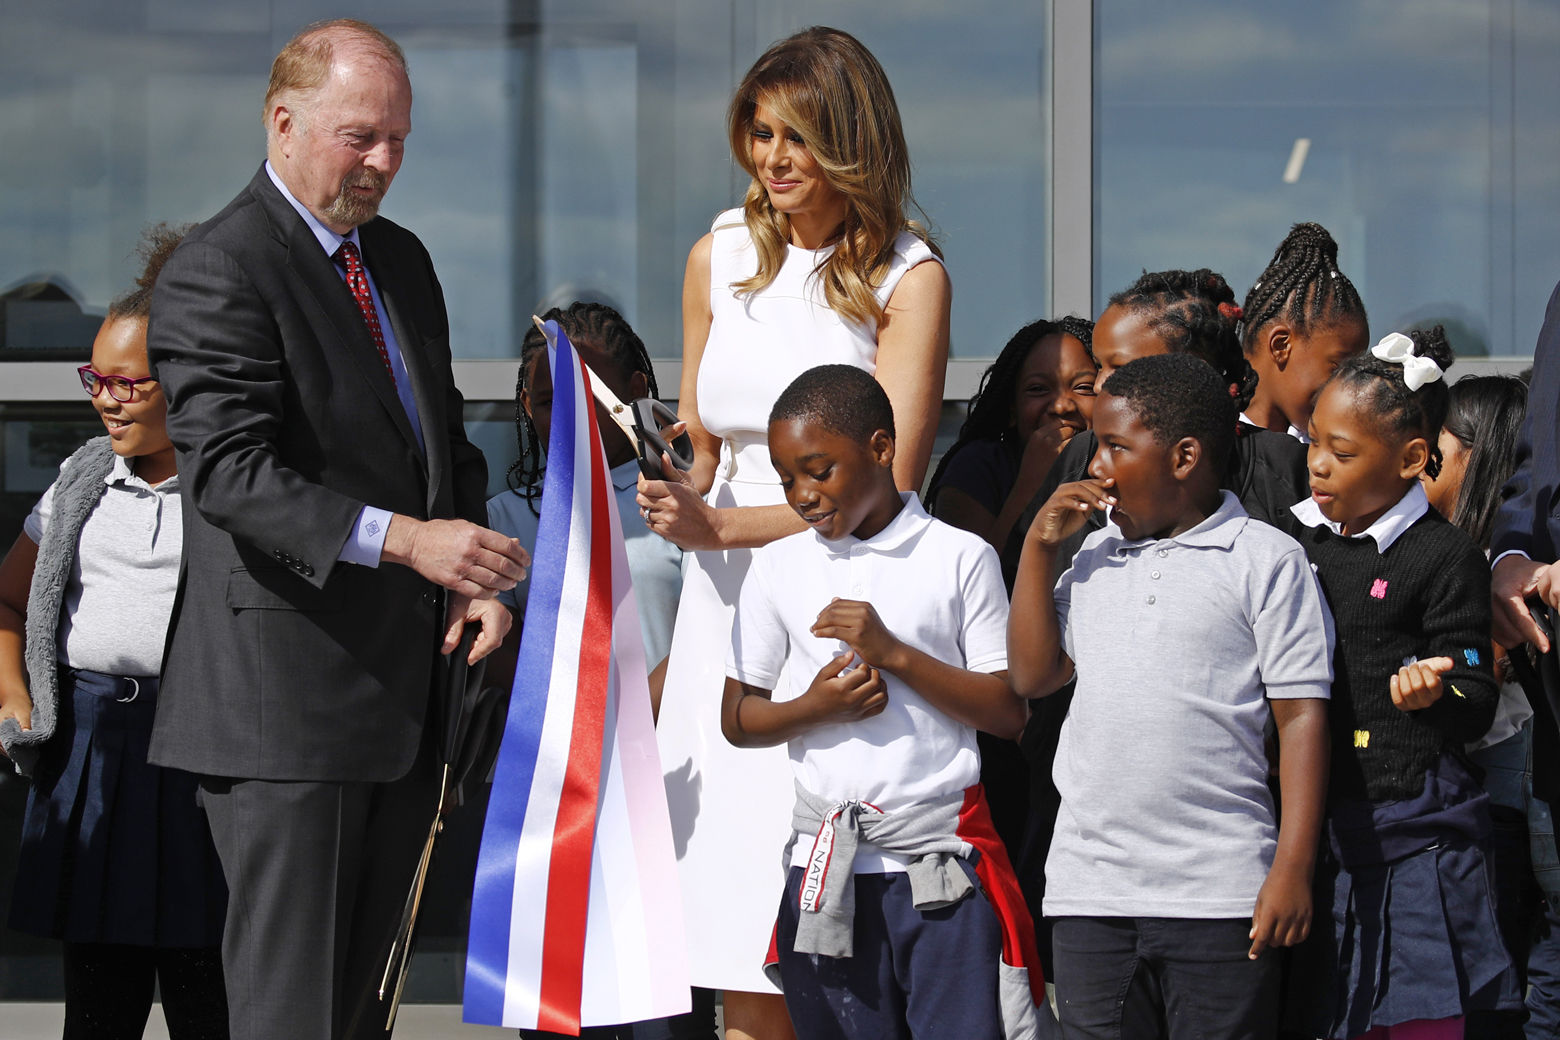 First lady Melania Trump, center, and Department of Interior assistant secretary Rob Wallace, left, participate in a ribbon-cutting ceremony with students from Amidon-Bowen Elementary School in Washington to re-open the Washington Monument, Thursday, Sept. 19, 2019, in Washington. The monument has been closed to the public for renovations since August 2016. (AP Photo/Patrick Semansky)